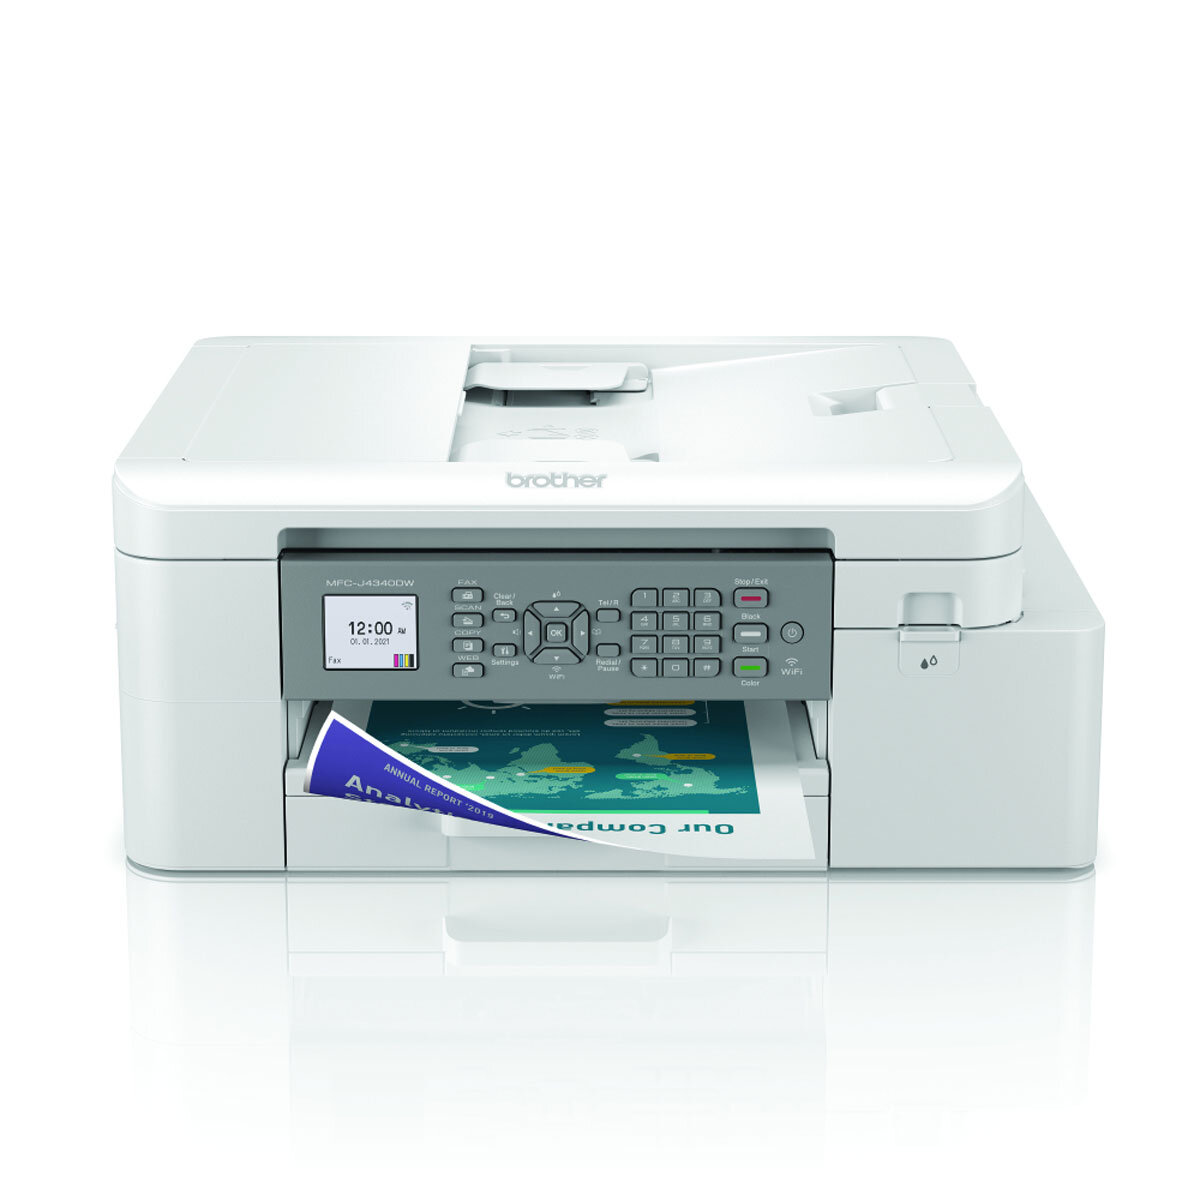 Brother MFC-J4335DW Colour Ink Jet 4in1 Wireless Printer Main Image